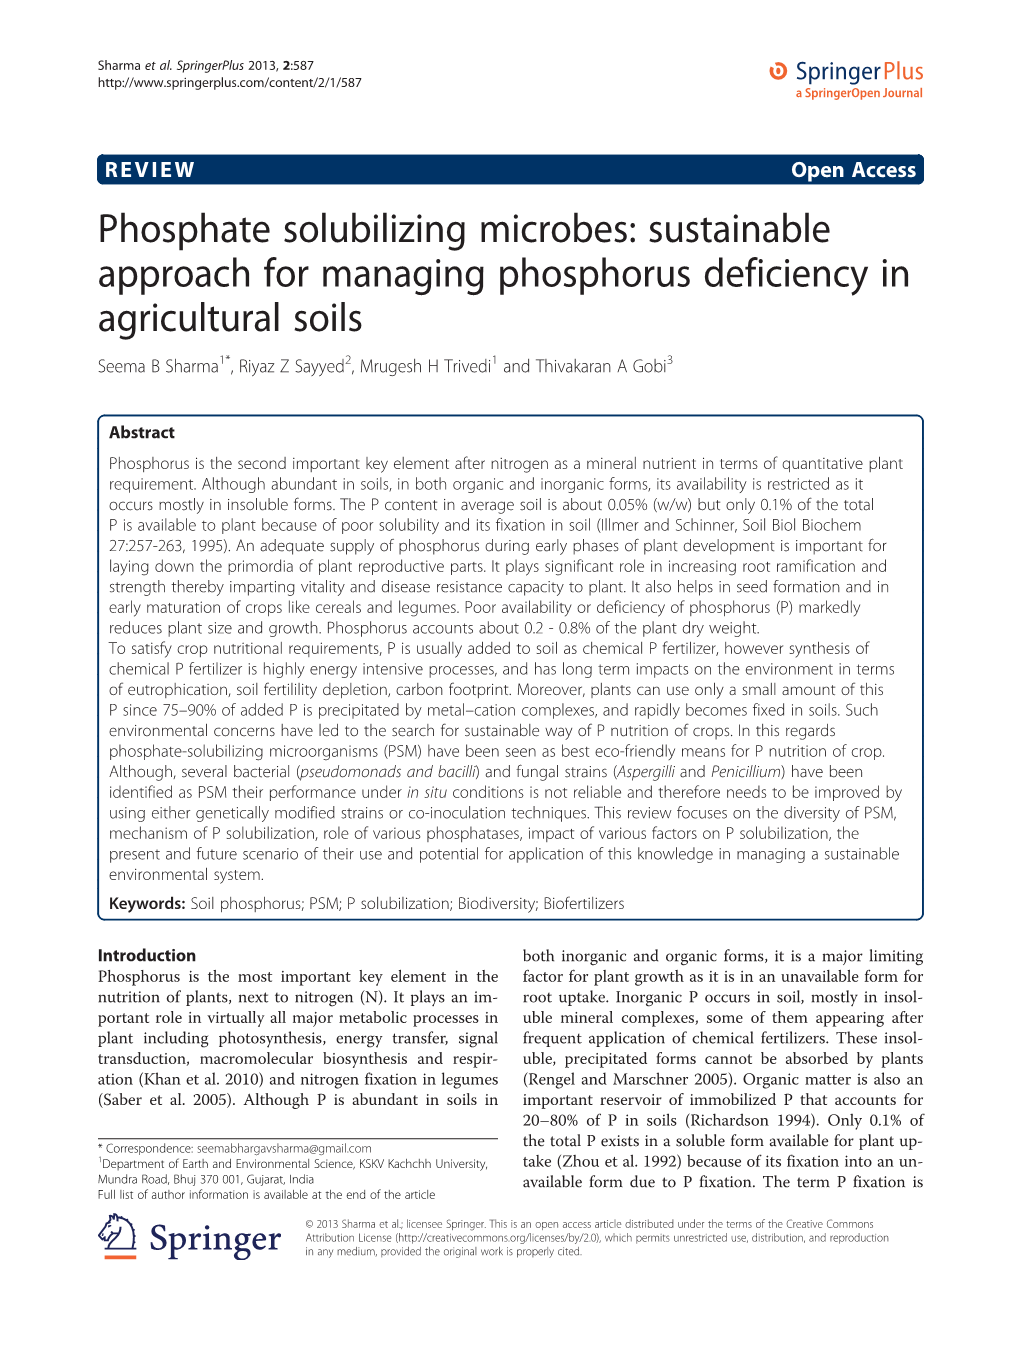 Phosphate Solubilizing Microbes: Sustainable Approach for Managing